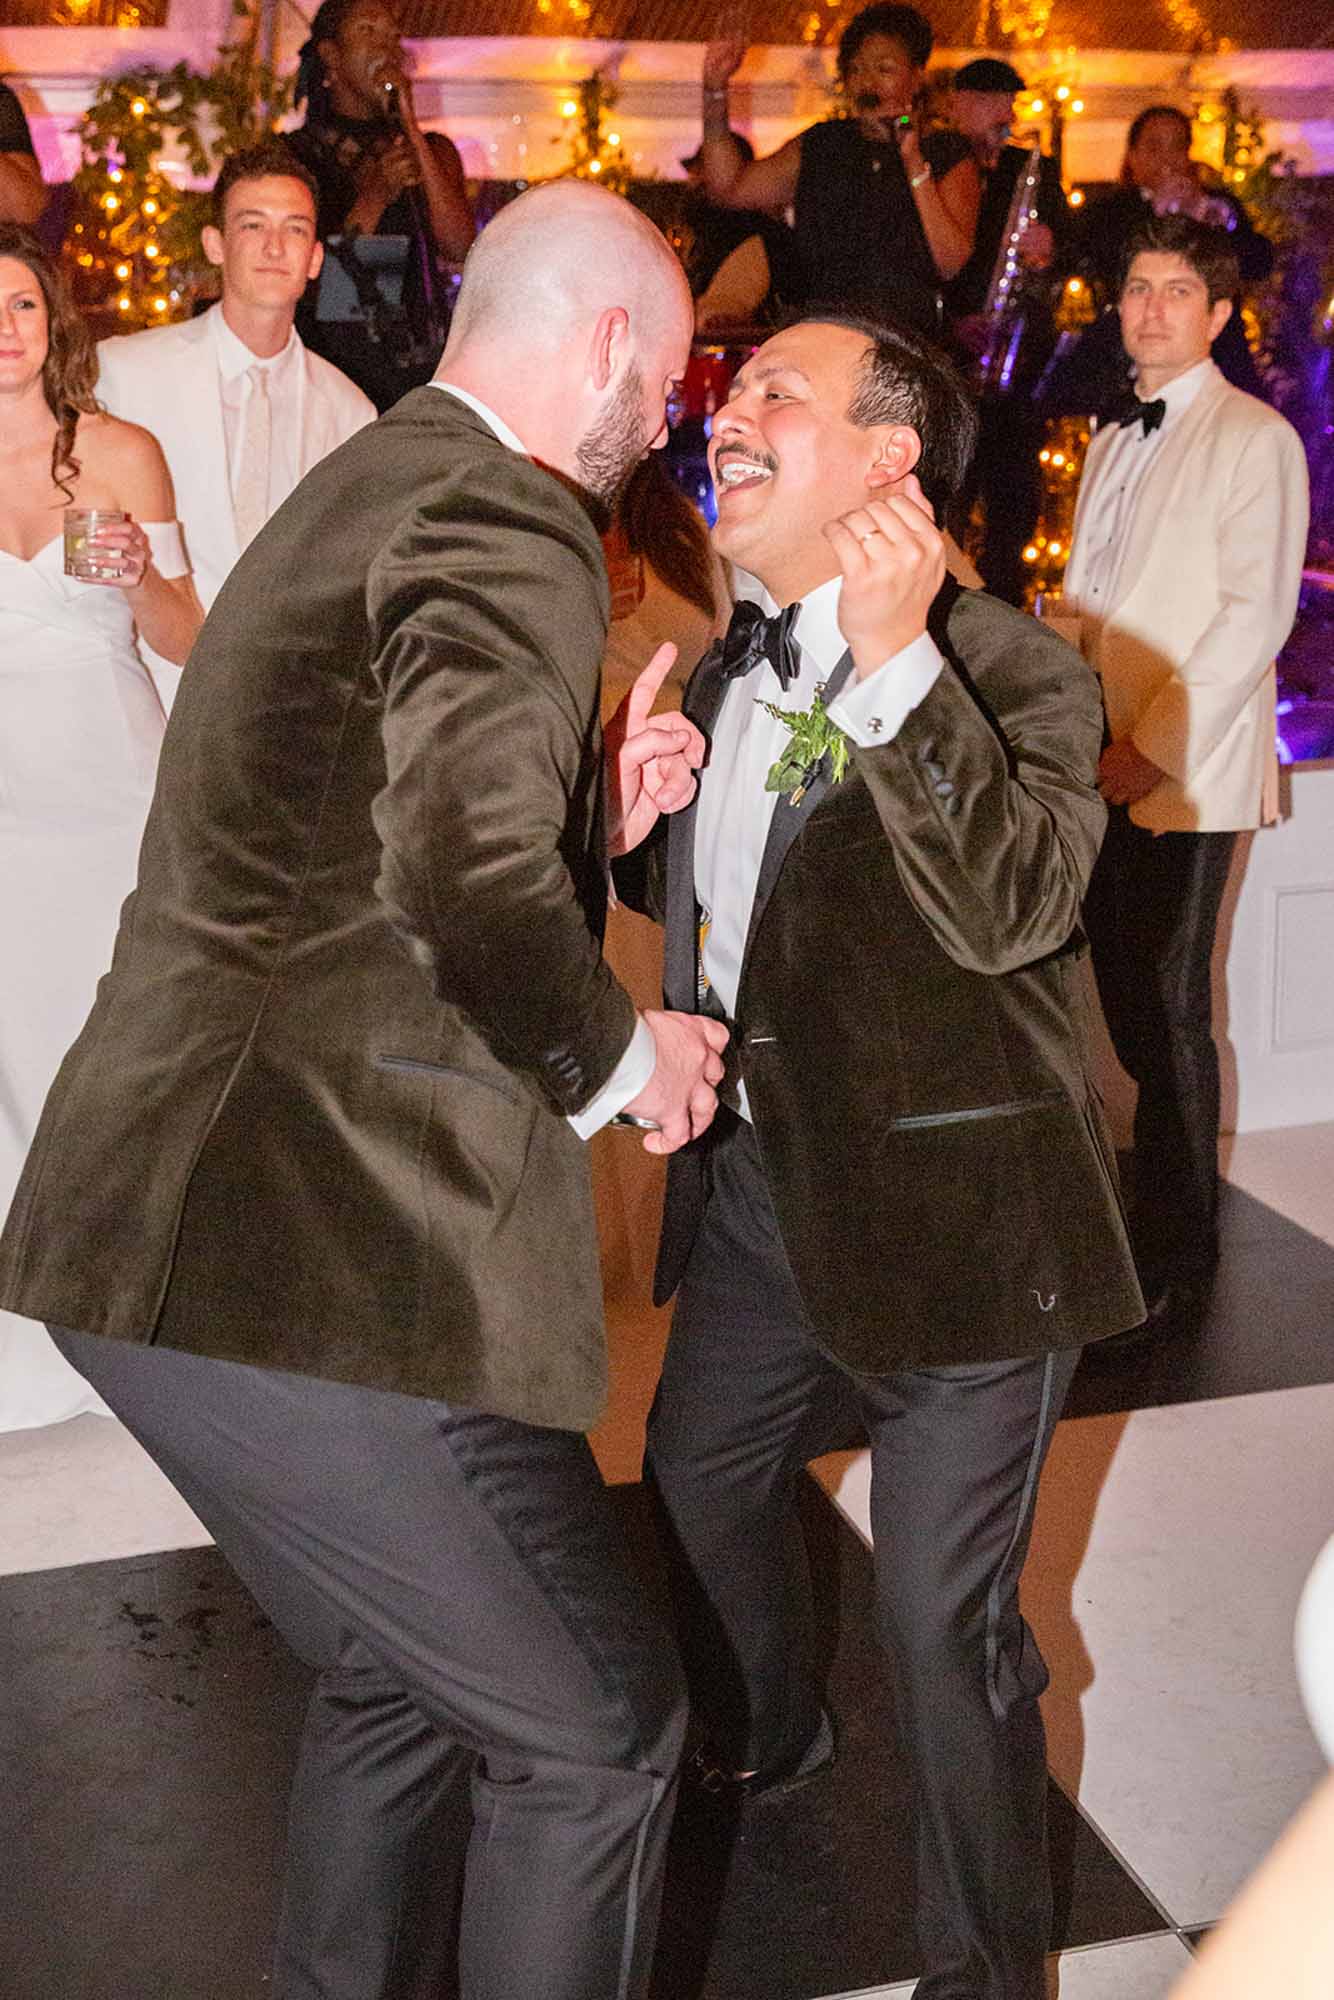 The guests wore white at this South Carolina wedding | Cameron Hinkle Photography | Featured on Equally Wed, the leading LGBTQ+ wedding magazine